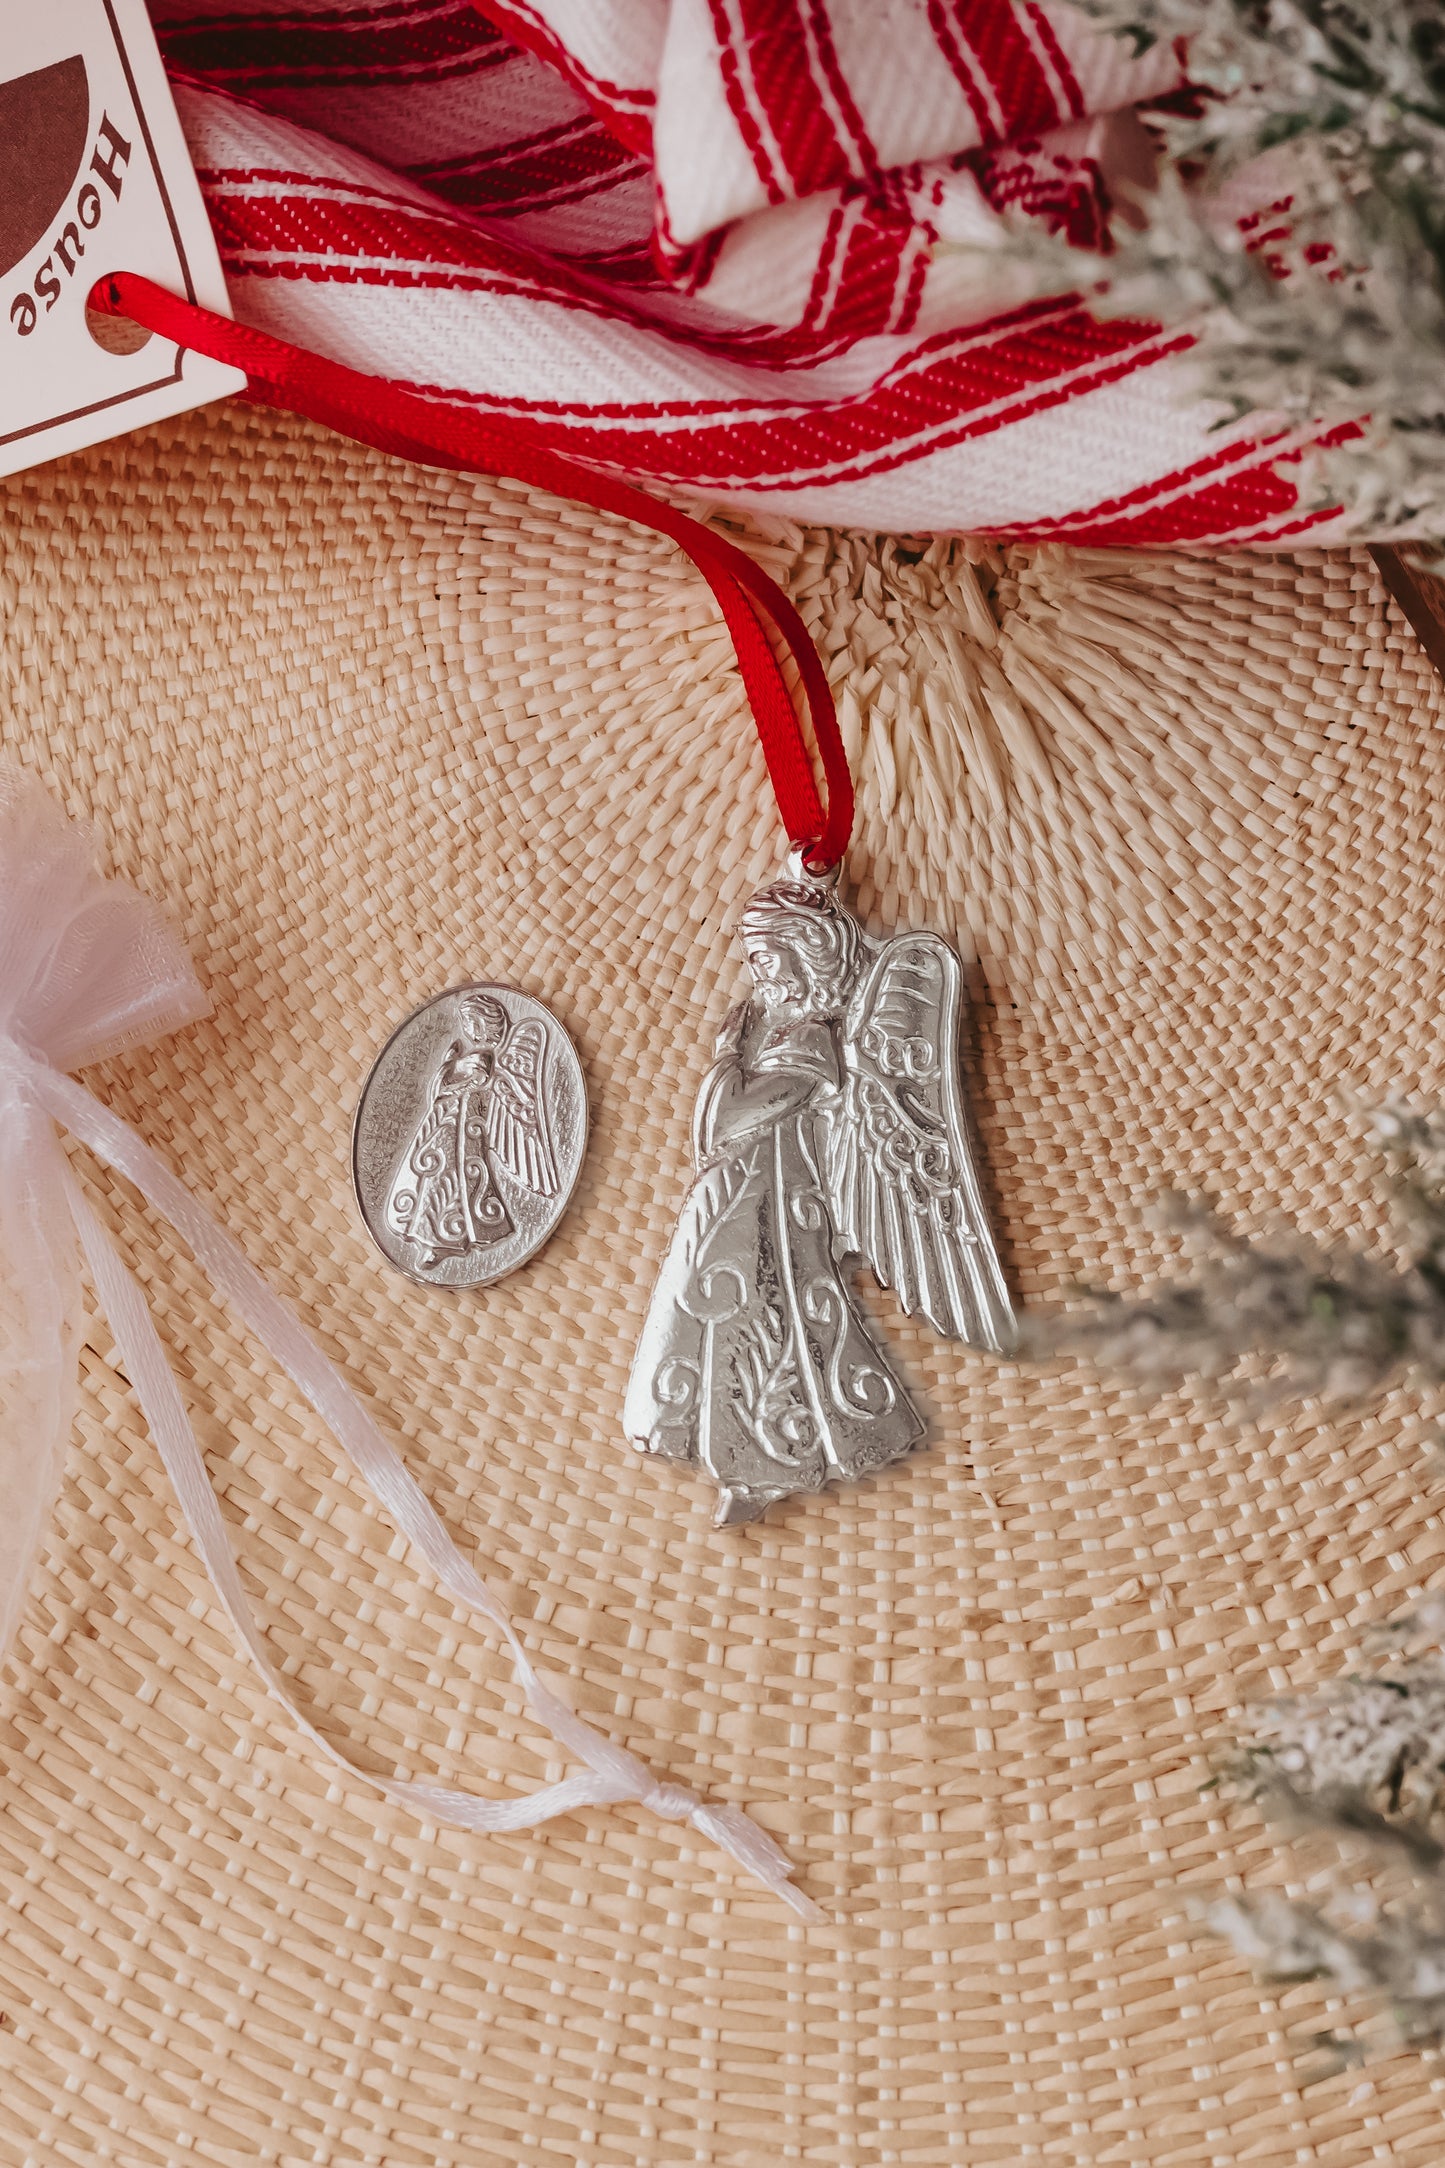 Praying Angel Gift Set - Guardian Angel Ornament and Pocket Coin